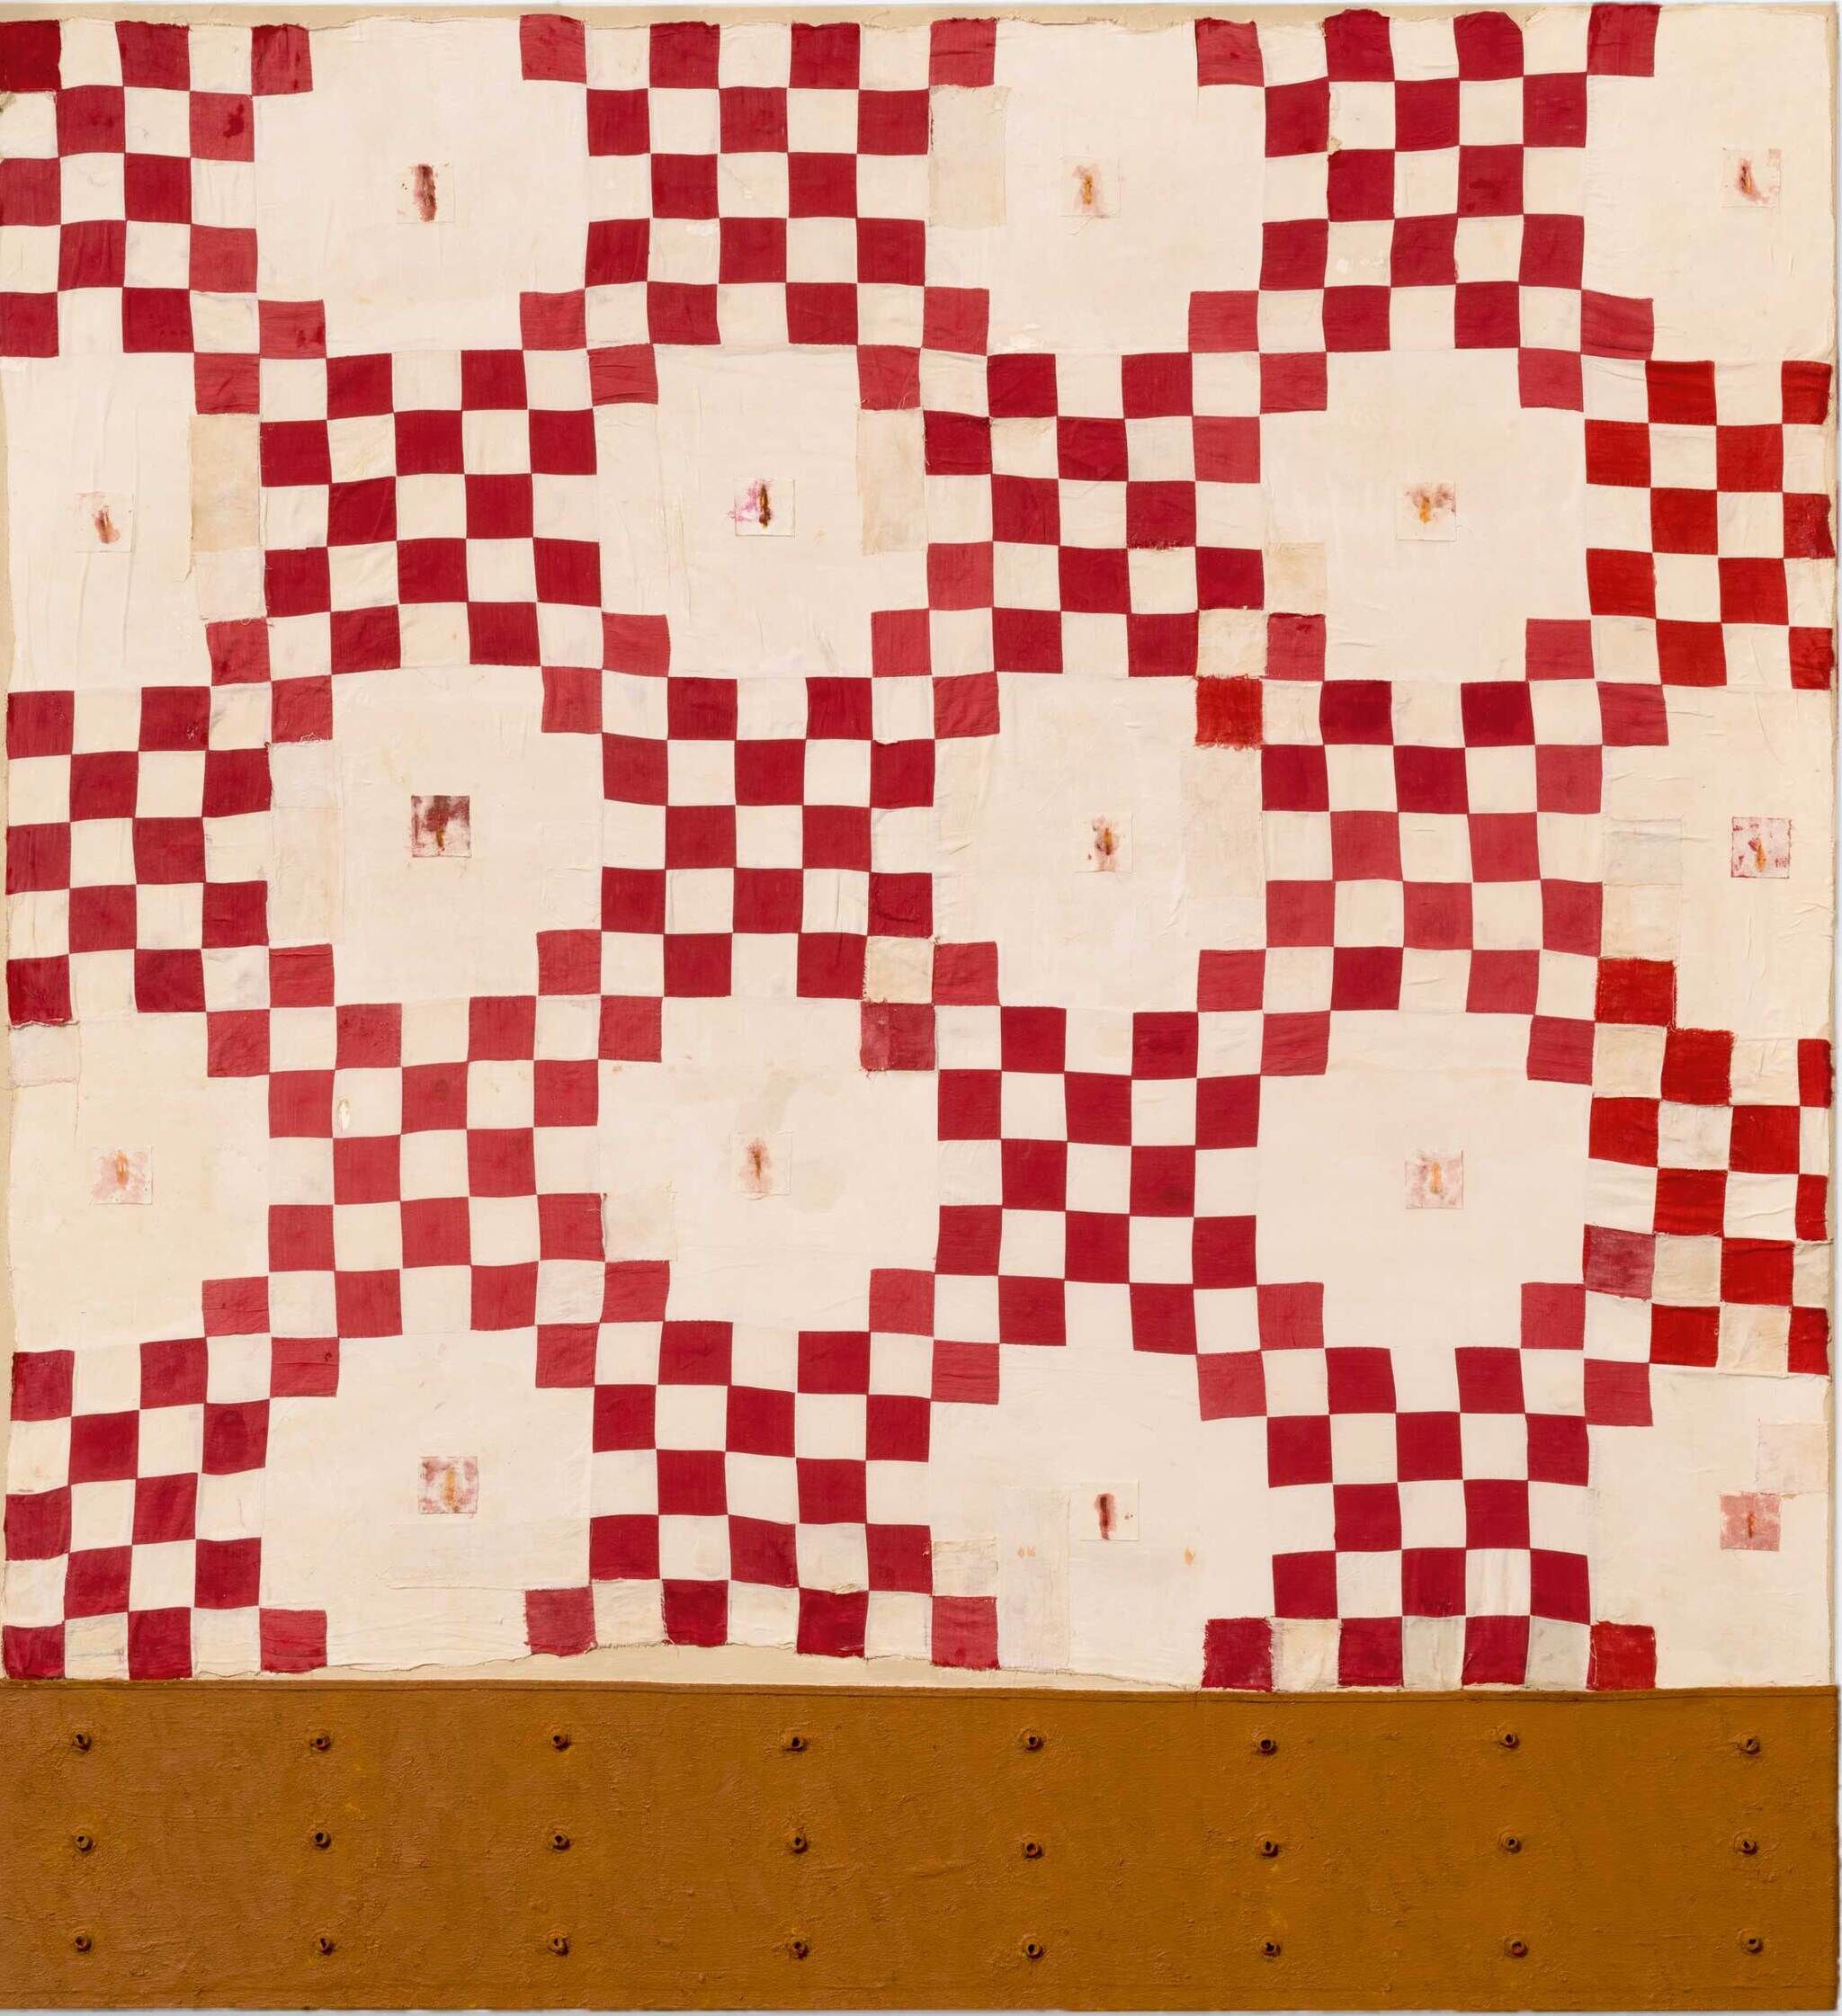 A stained red and white checkered quilt with a repeating pattern.